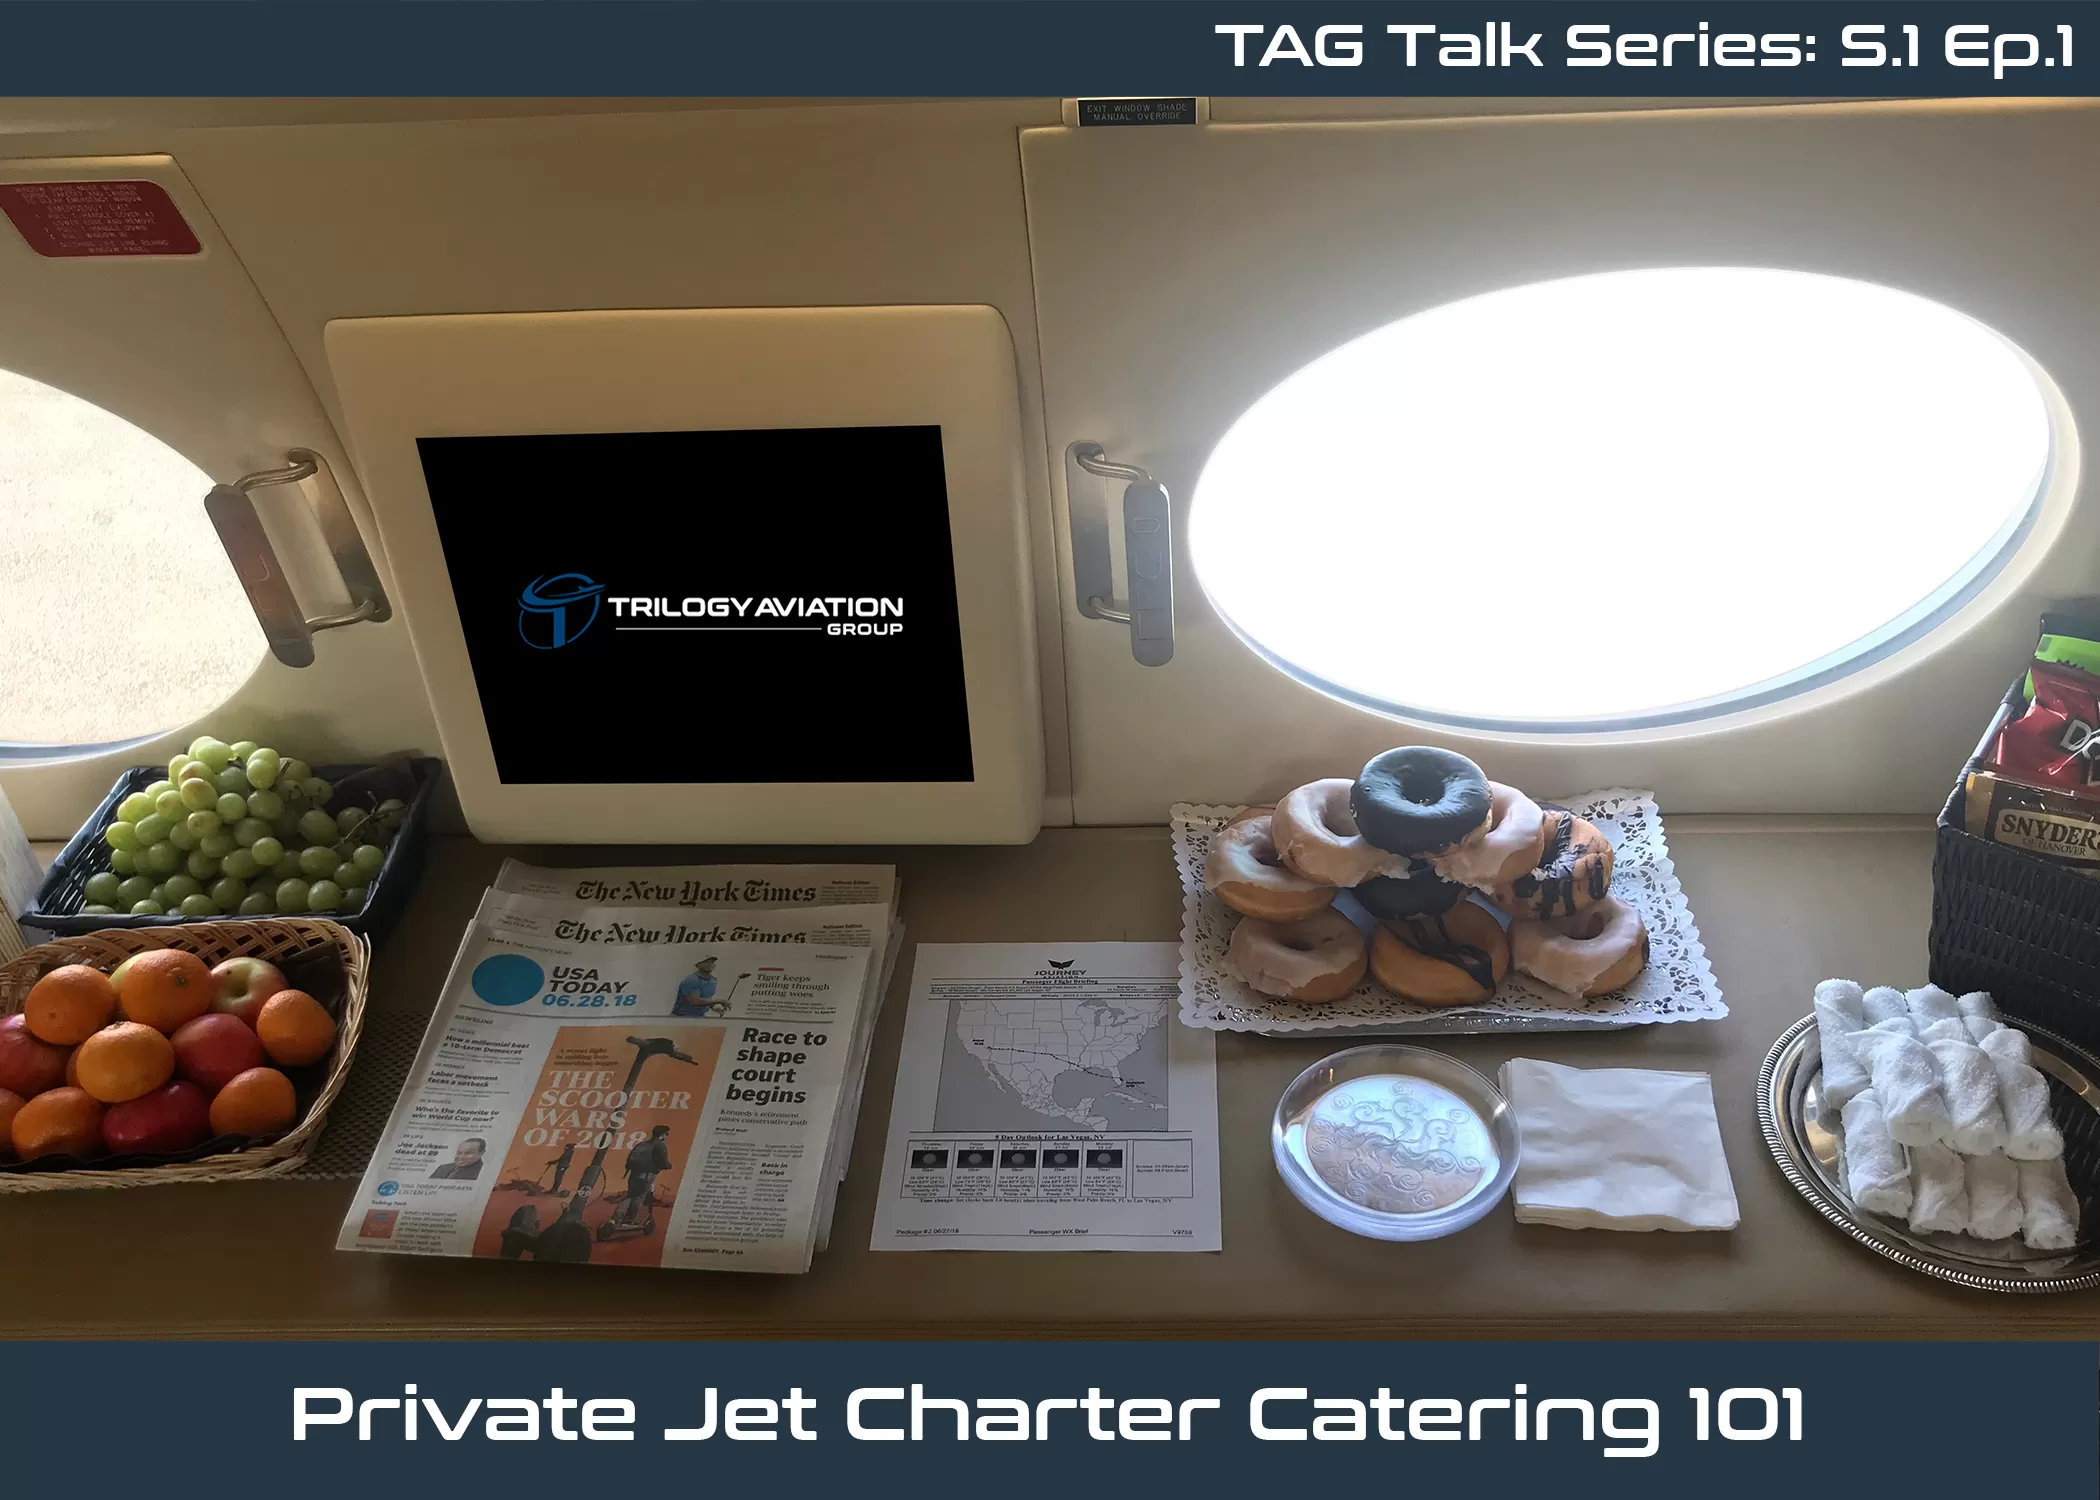 Private Jet Charter Catering 101